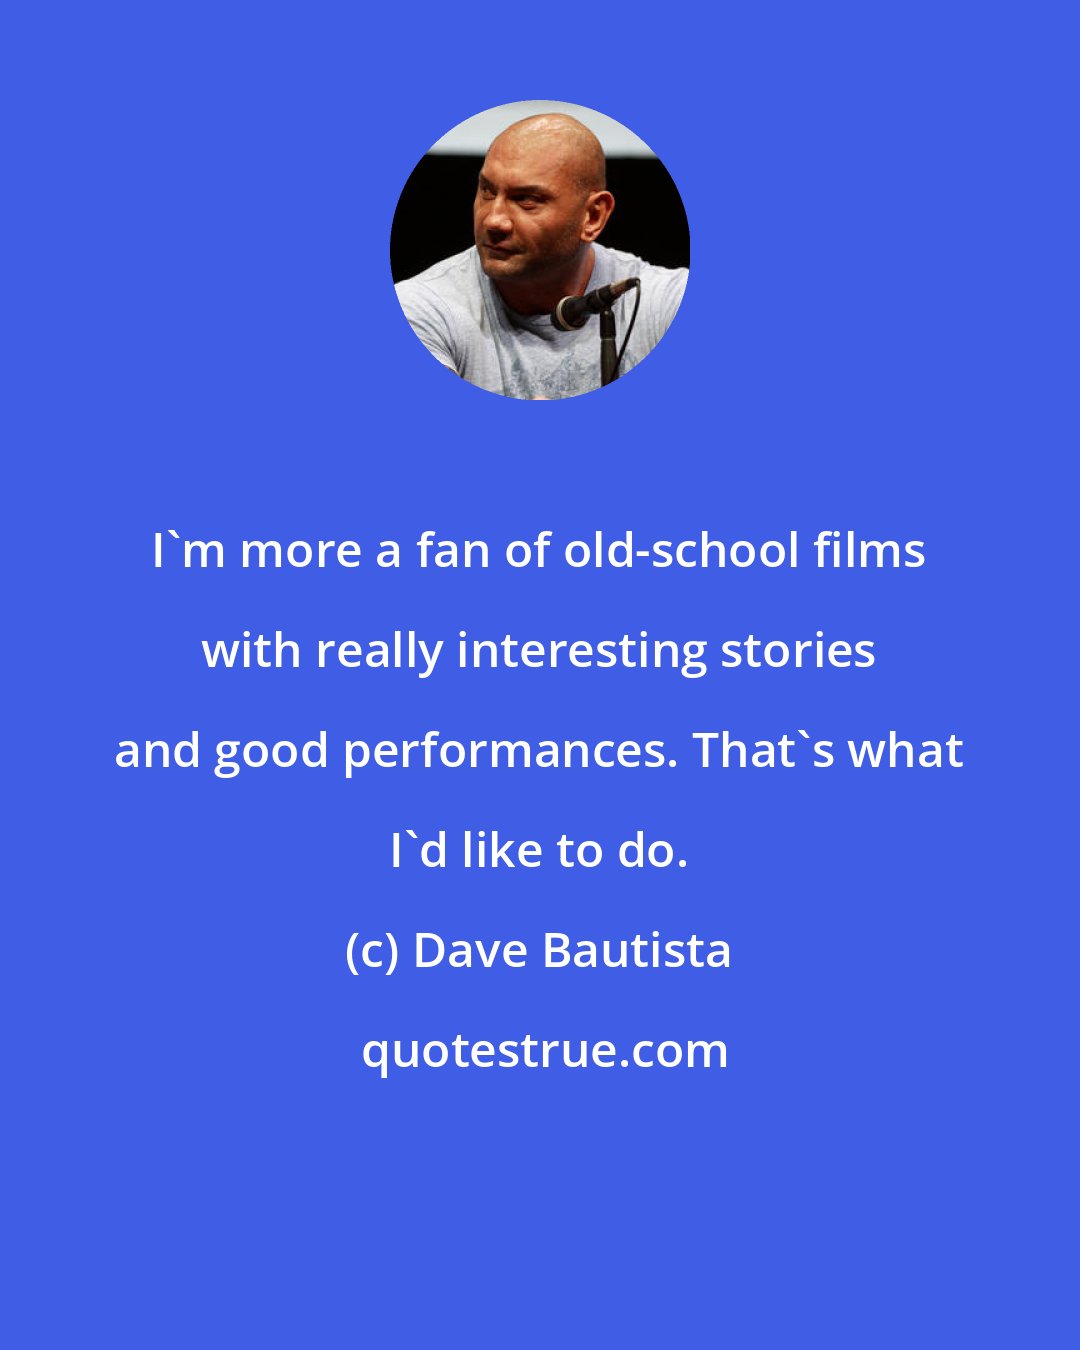 Dave Bautista: I'm more a fan of old-school films with really interesting stories and good performances. That's what I'd like to do.